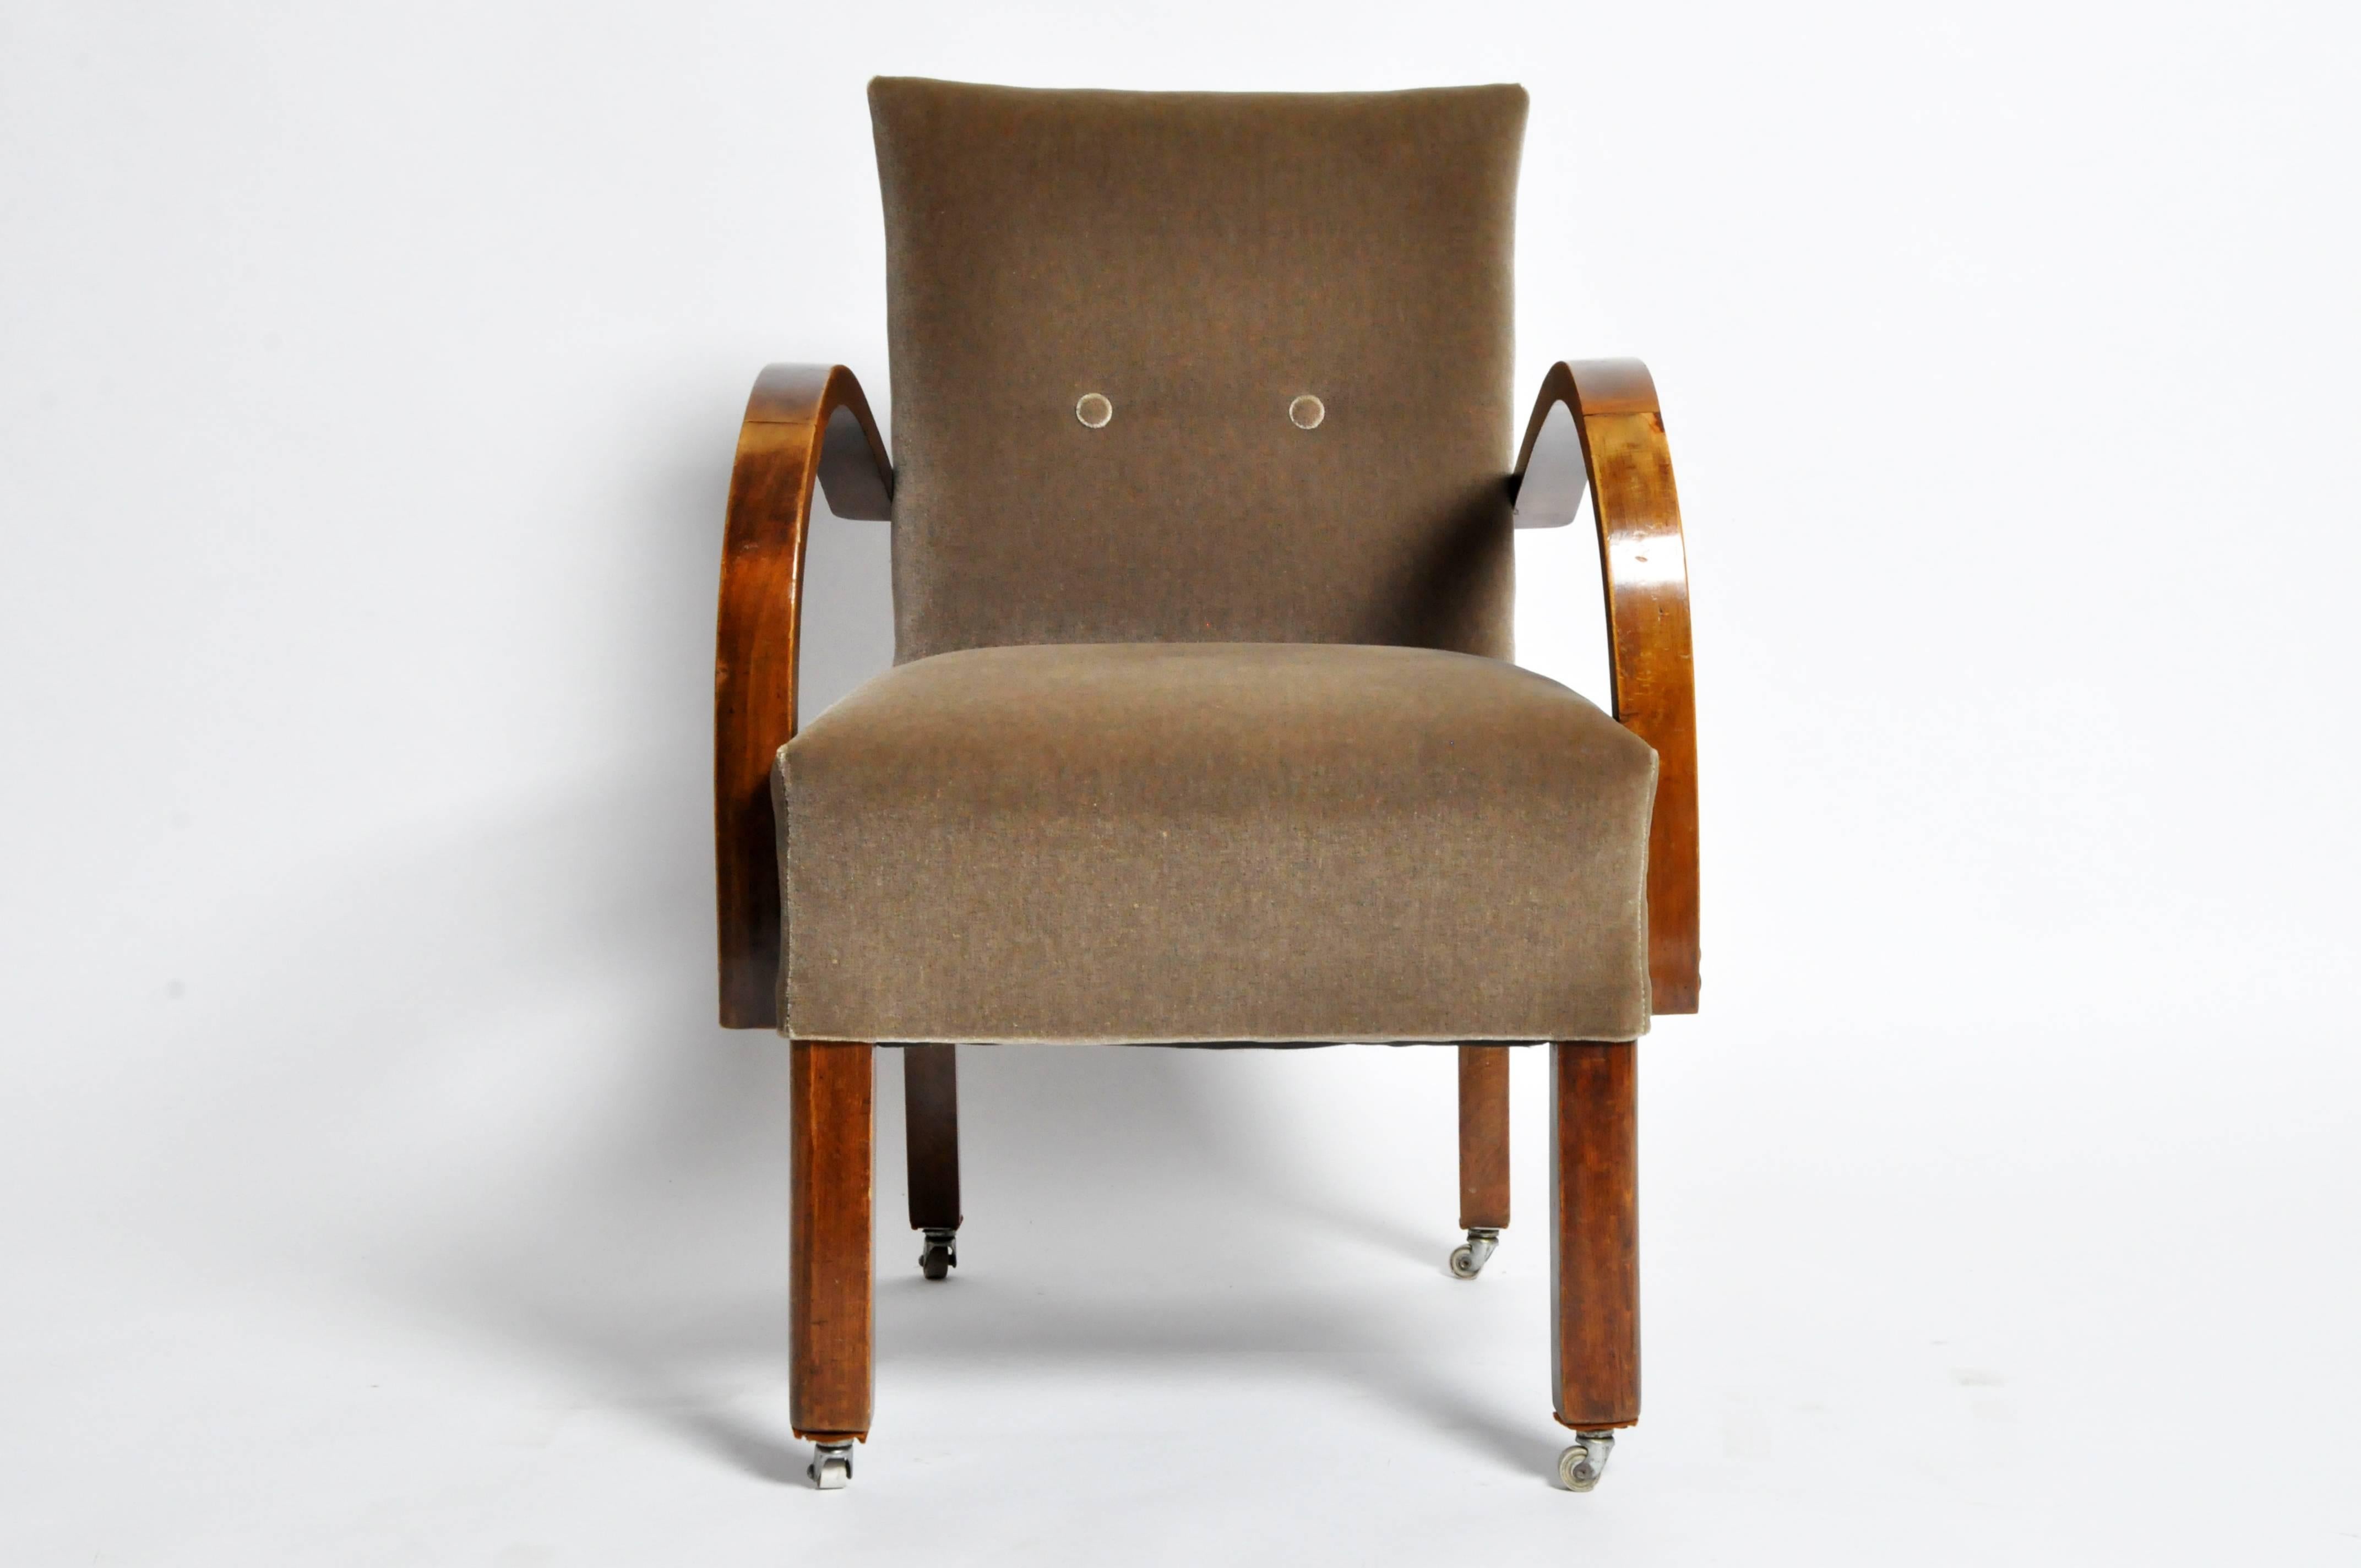 This handsome Art Deco style open armchairs is from Budapest, Hungary and is made from solid walnut. The chair features casters on the legs as well.